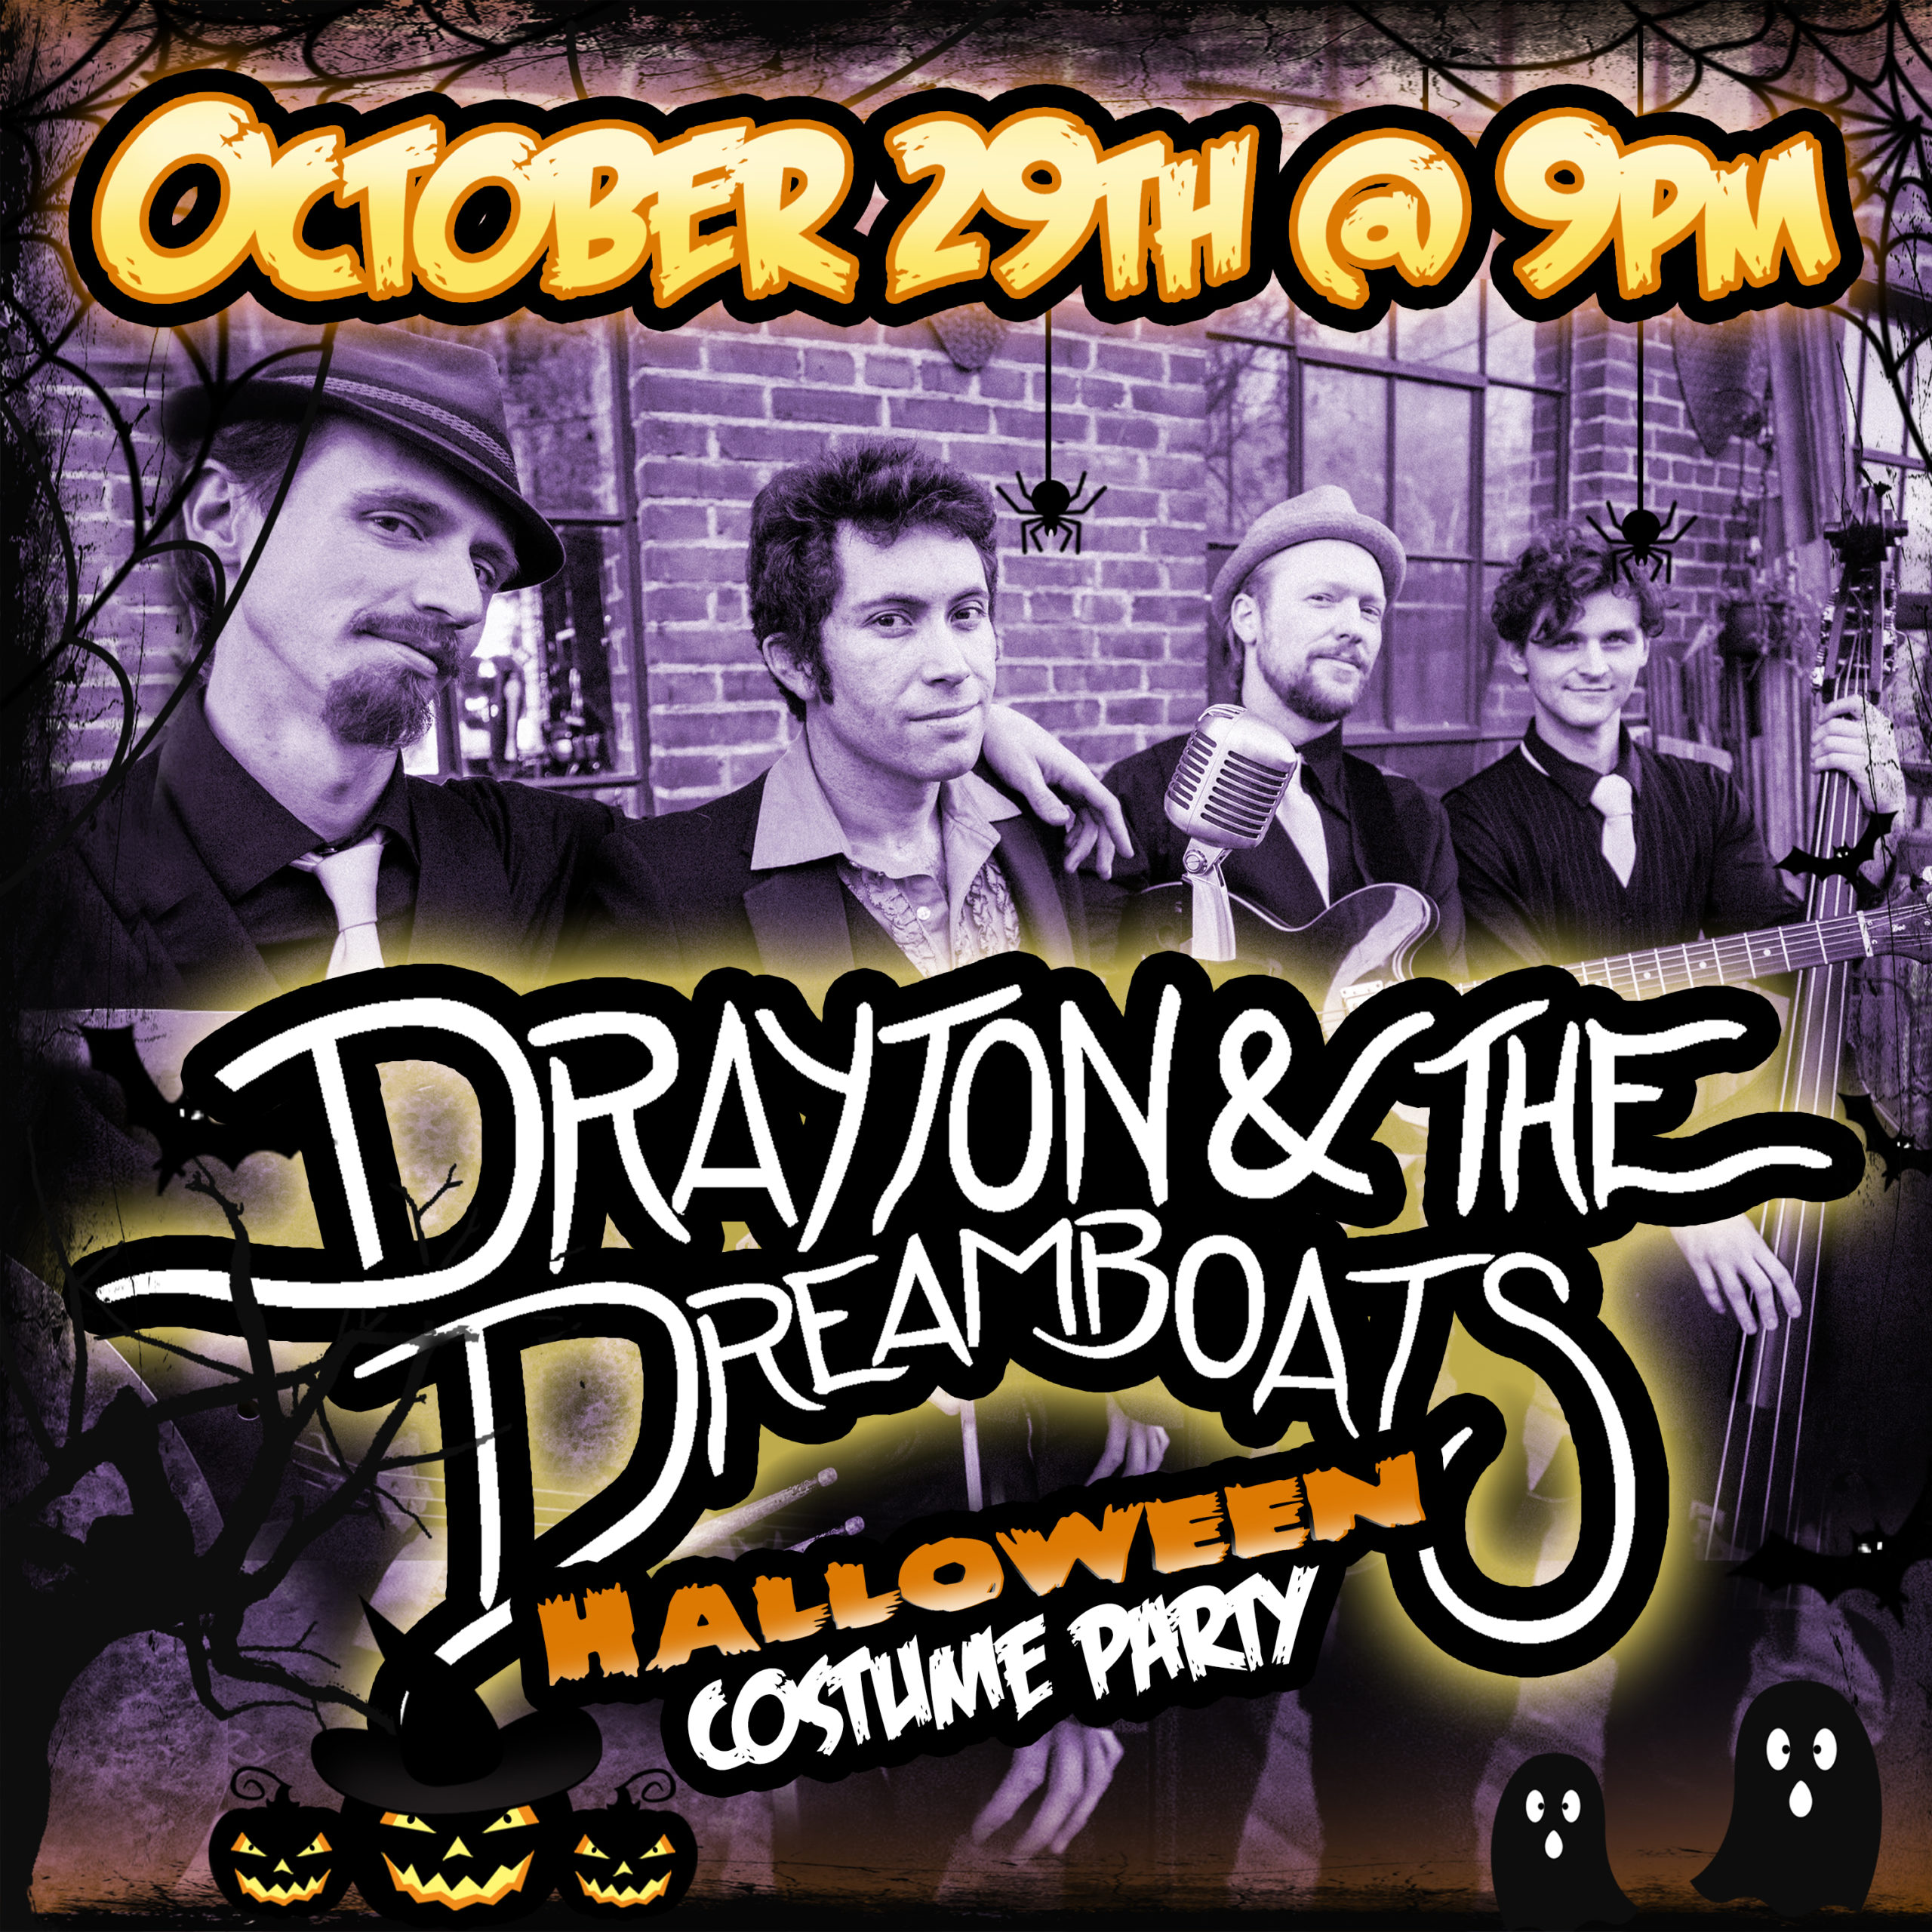 Halloween Party with Drayton & the Dreamboats